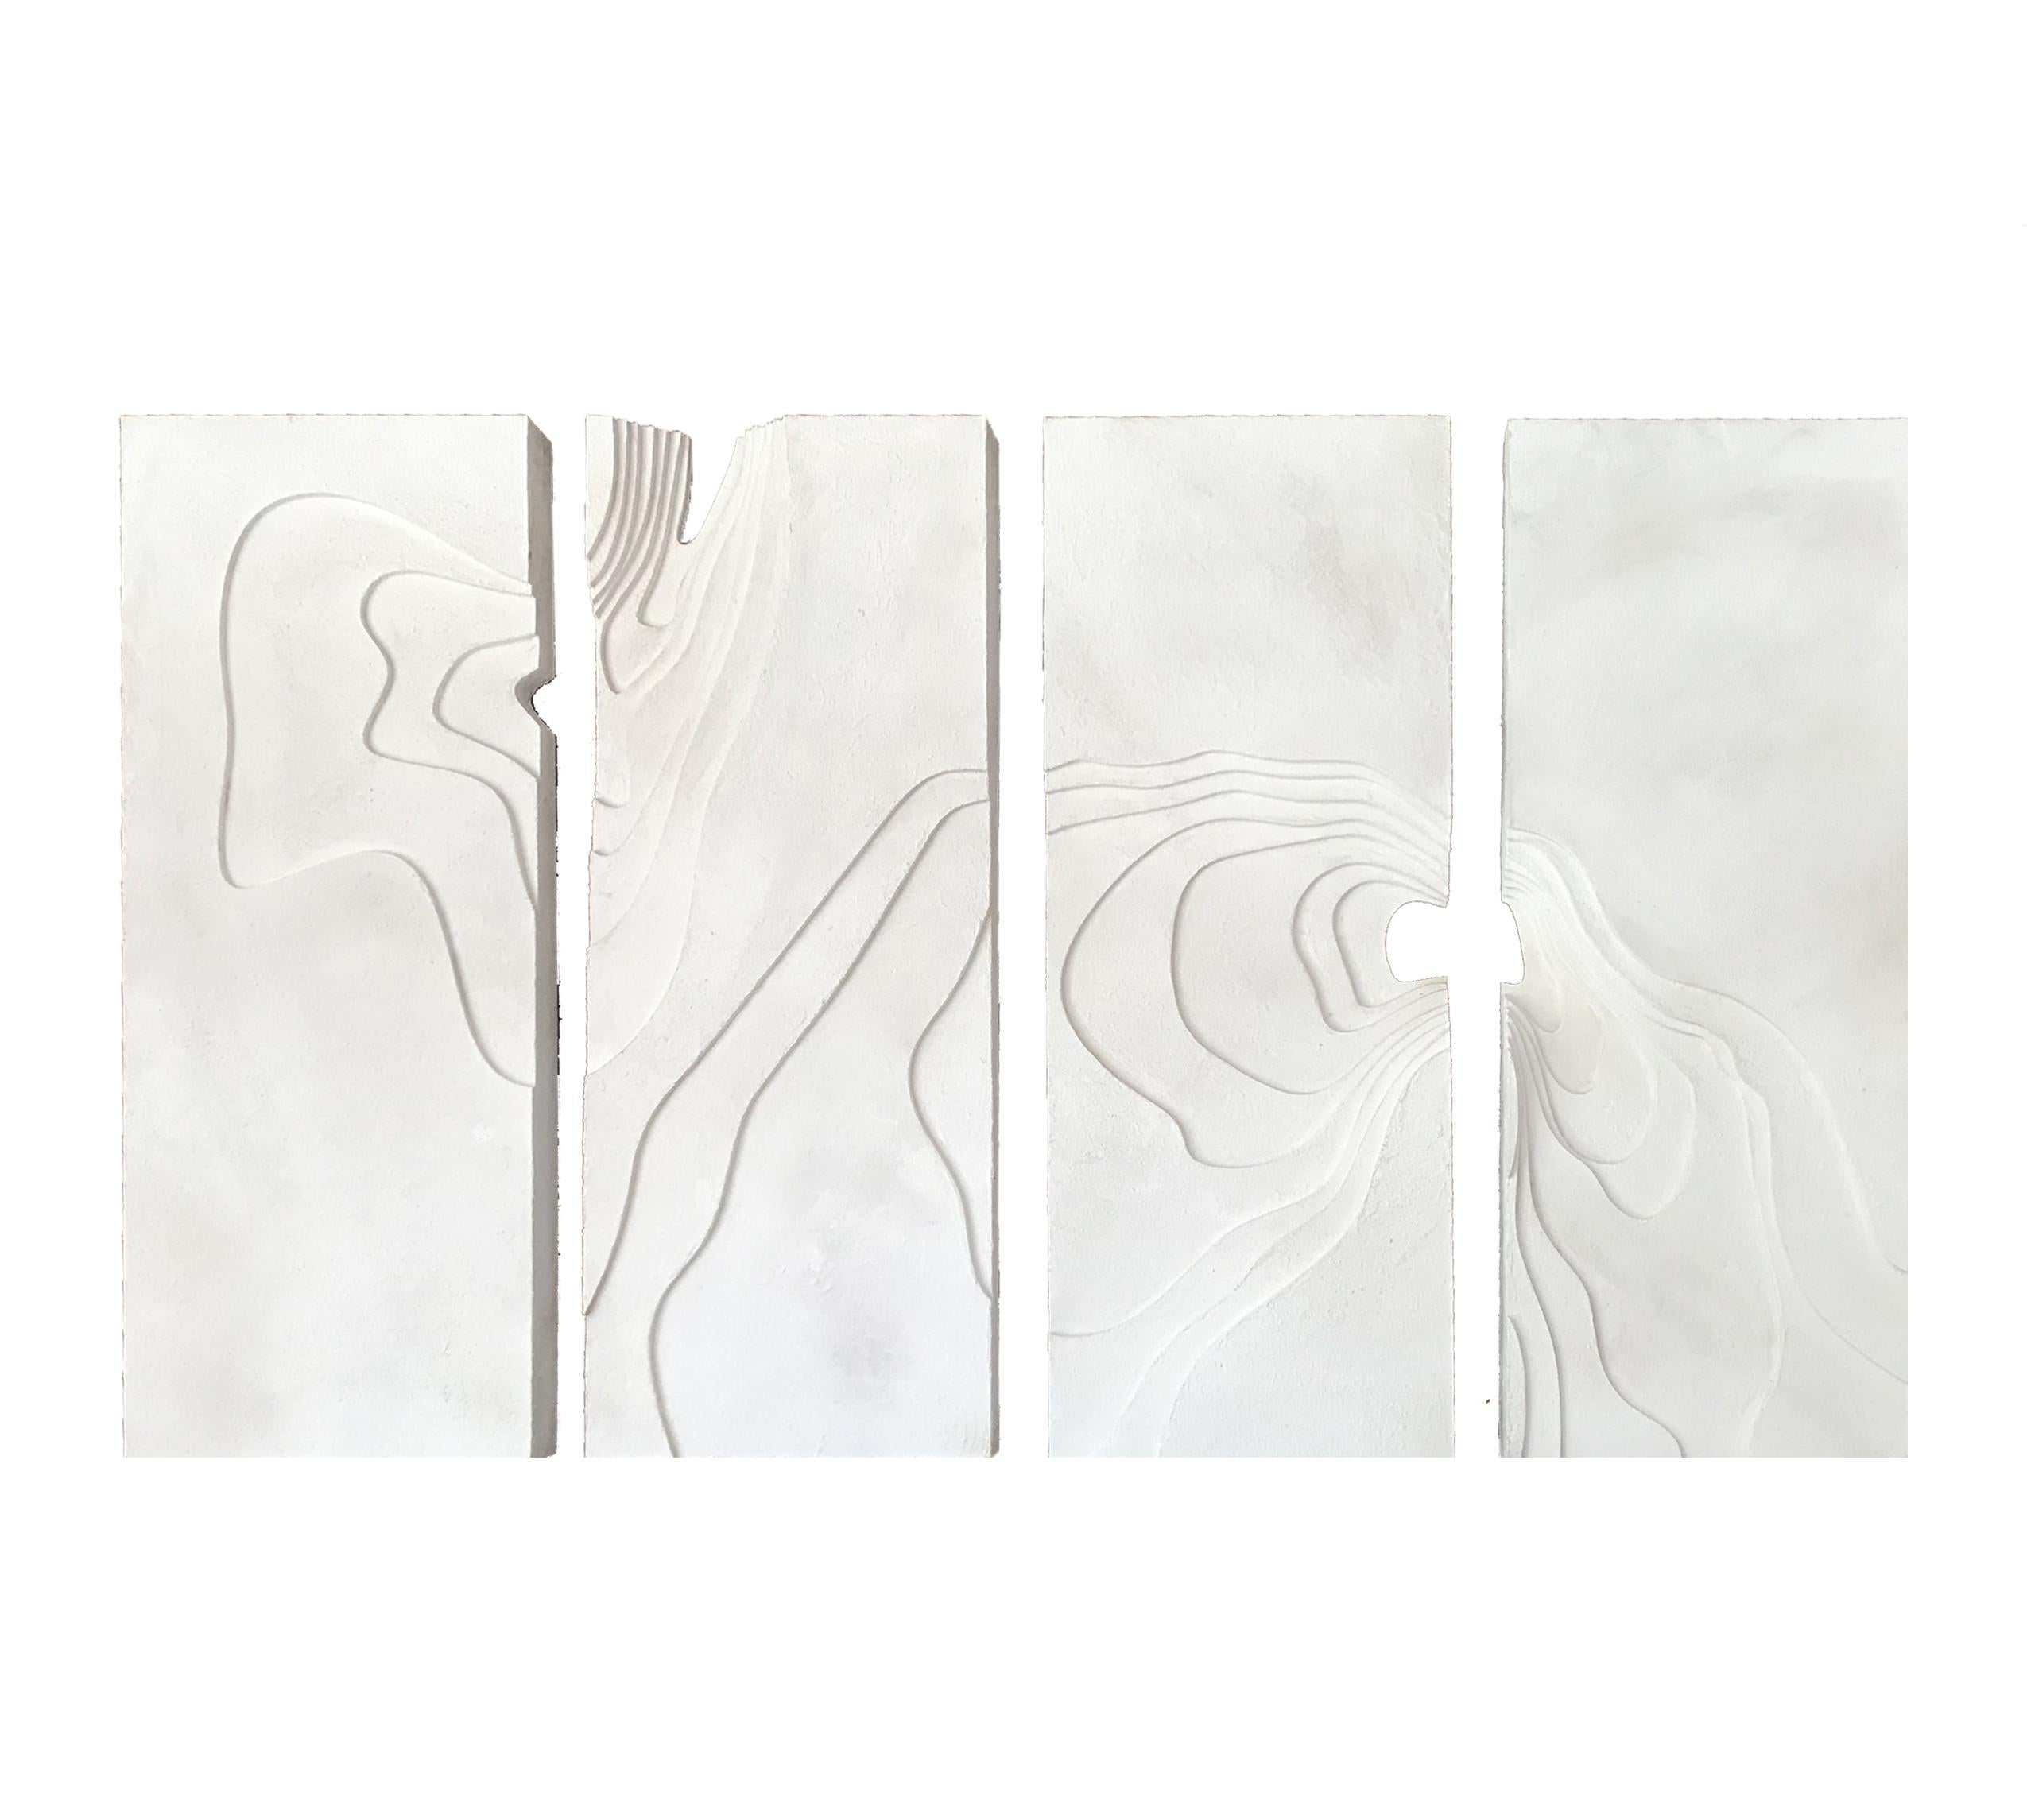 This outstanding art work was carefully traced and assembled in order to create a combination of organic forms and textures. The white color and silver touch contrasts perfectly with any color you may have on the background wall. 

The two artists